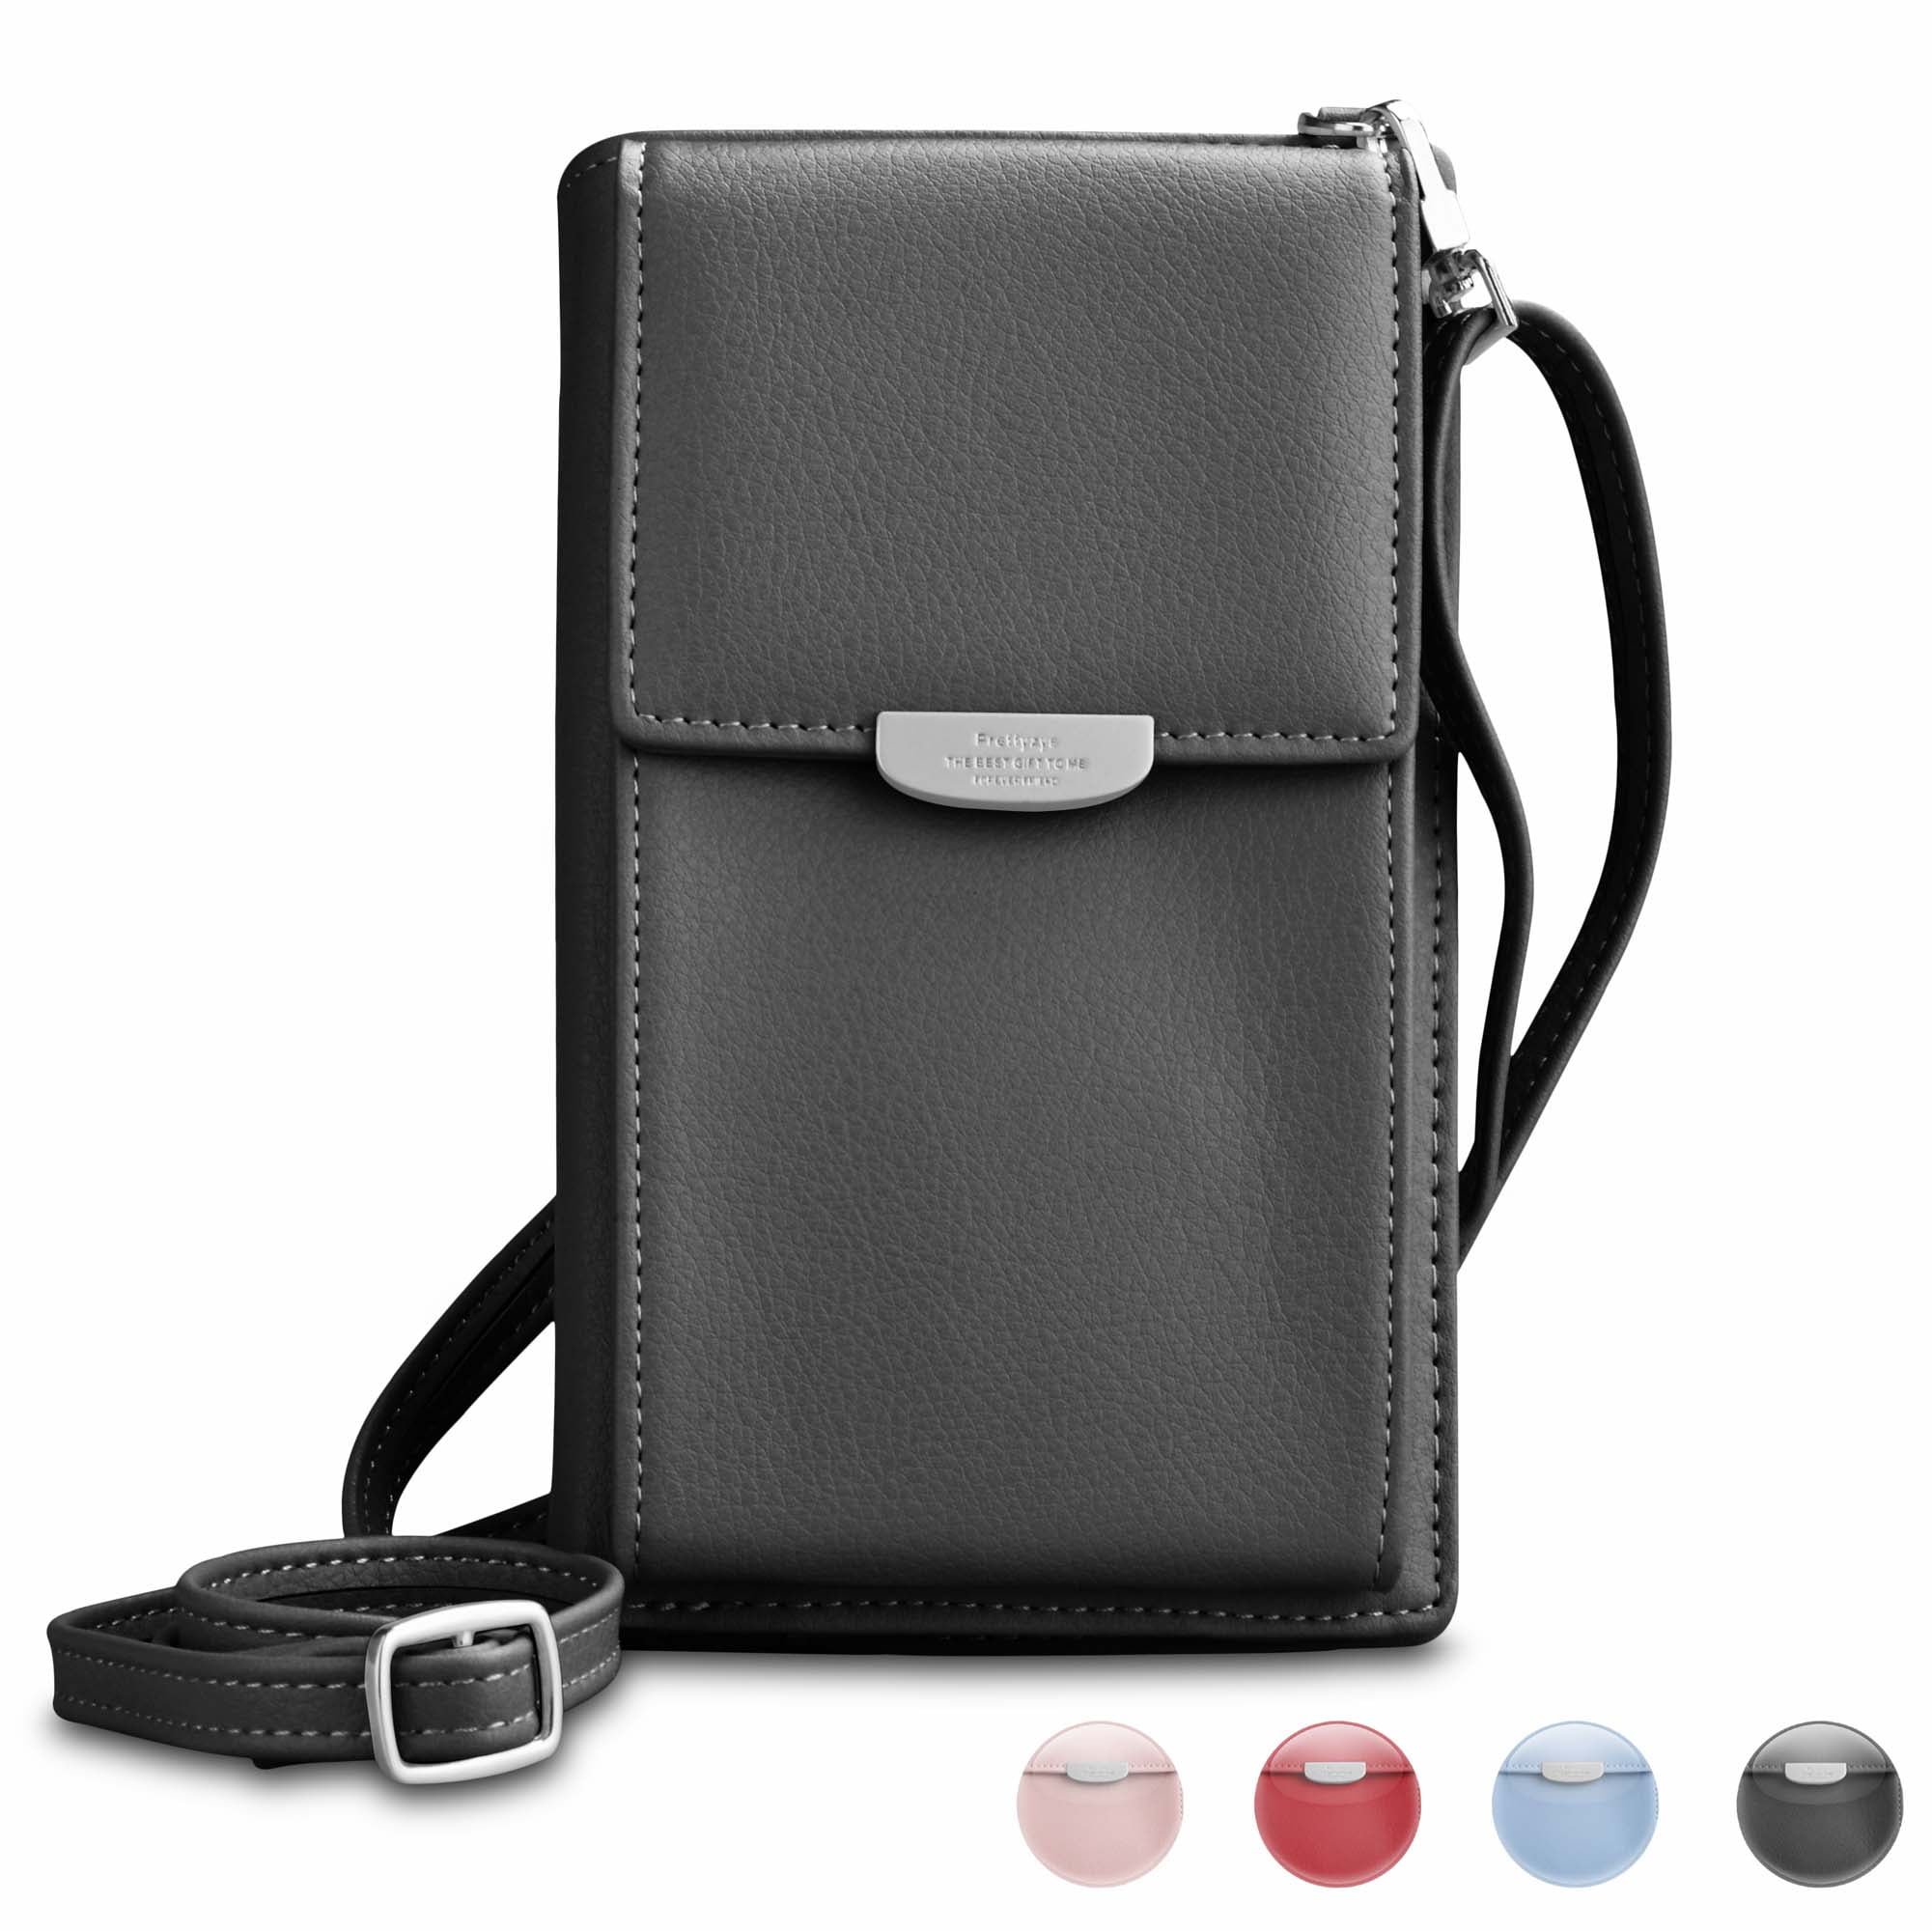 Women Wallet Purse Shoulder Bag PU Leather Coin Cell Phone Mini Cross-body Bag